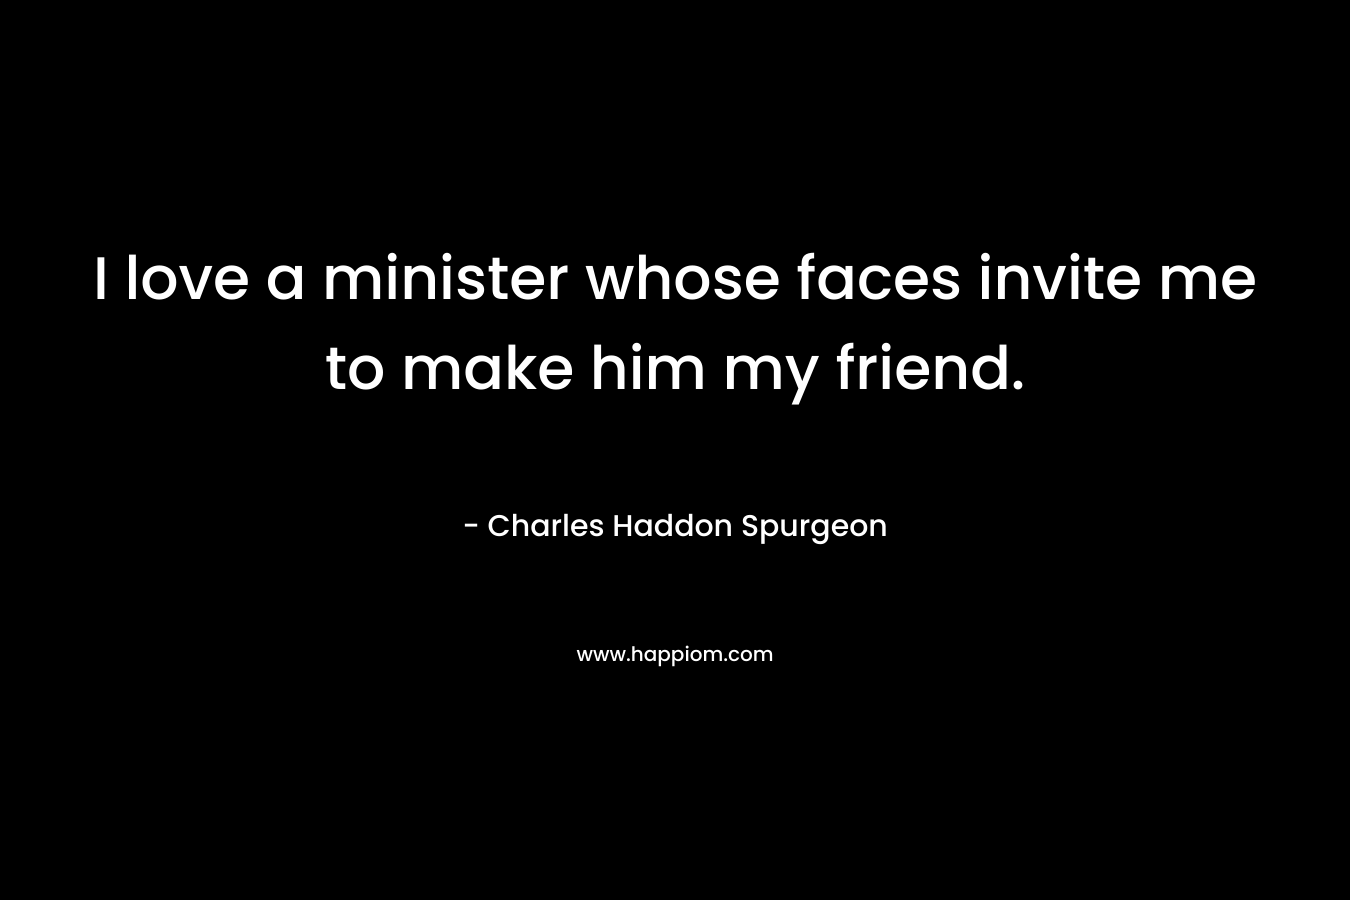 I love a minister whose faces invite me to make him my friend. – Charles Haddon Spurgeon